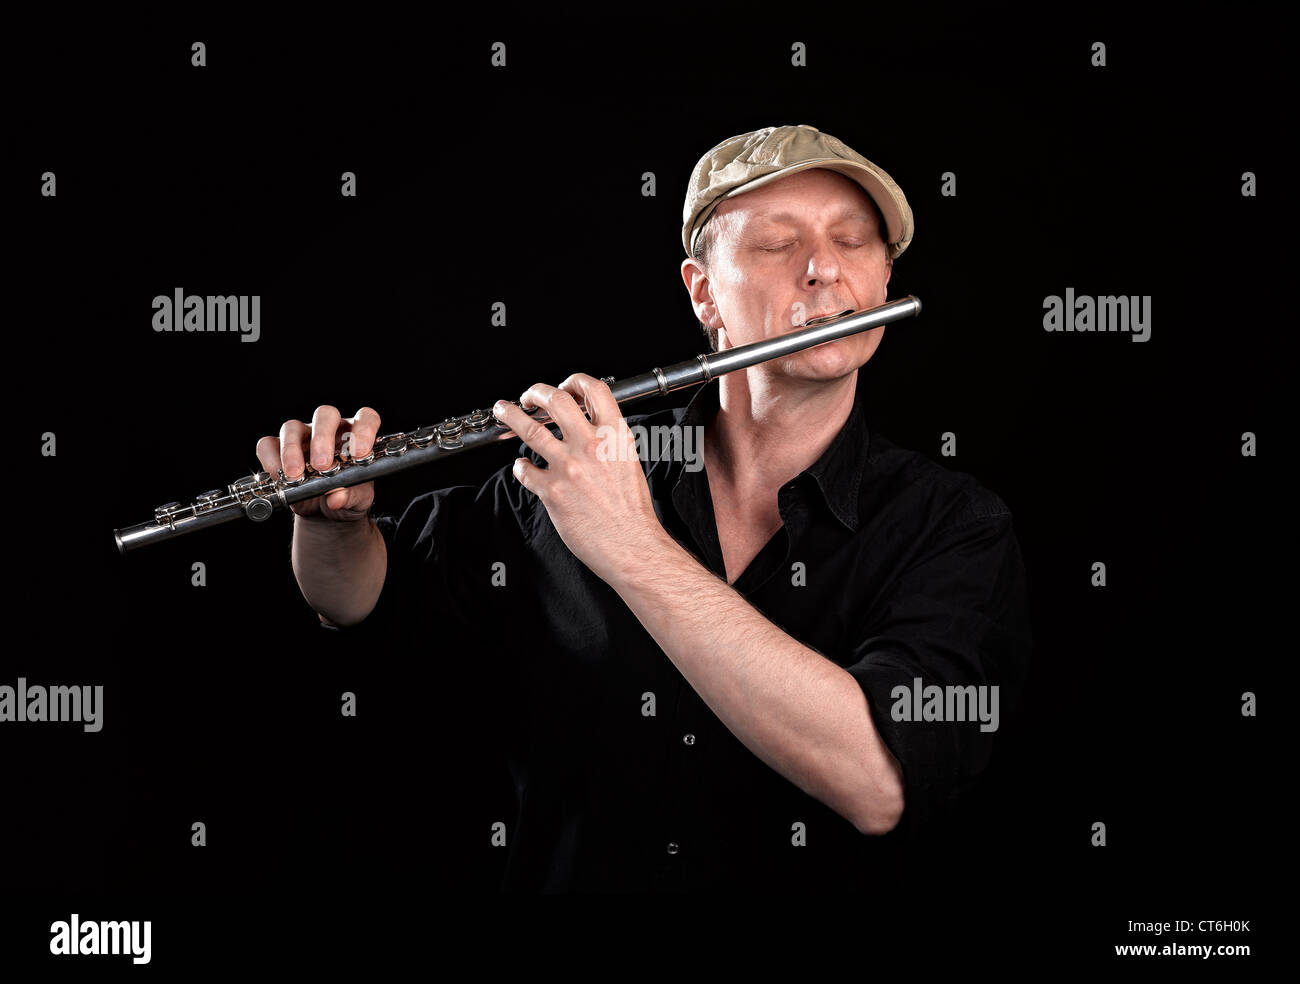 Portrait of a man playing old silver transverse flute on black background Stock Photo